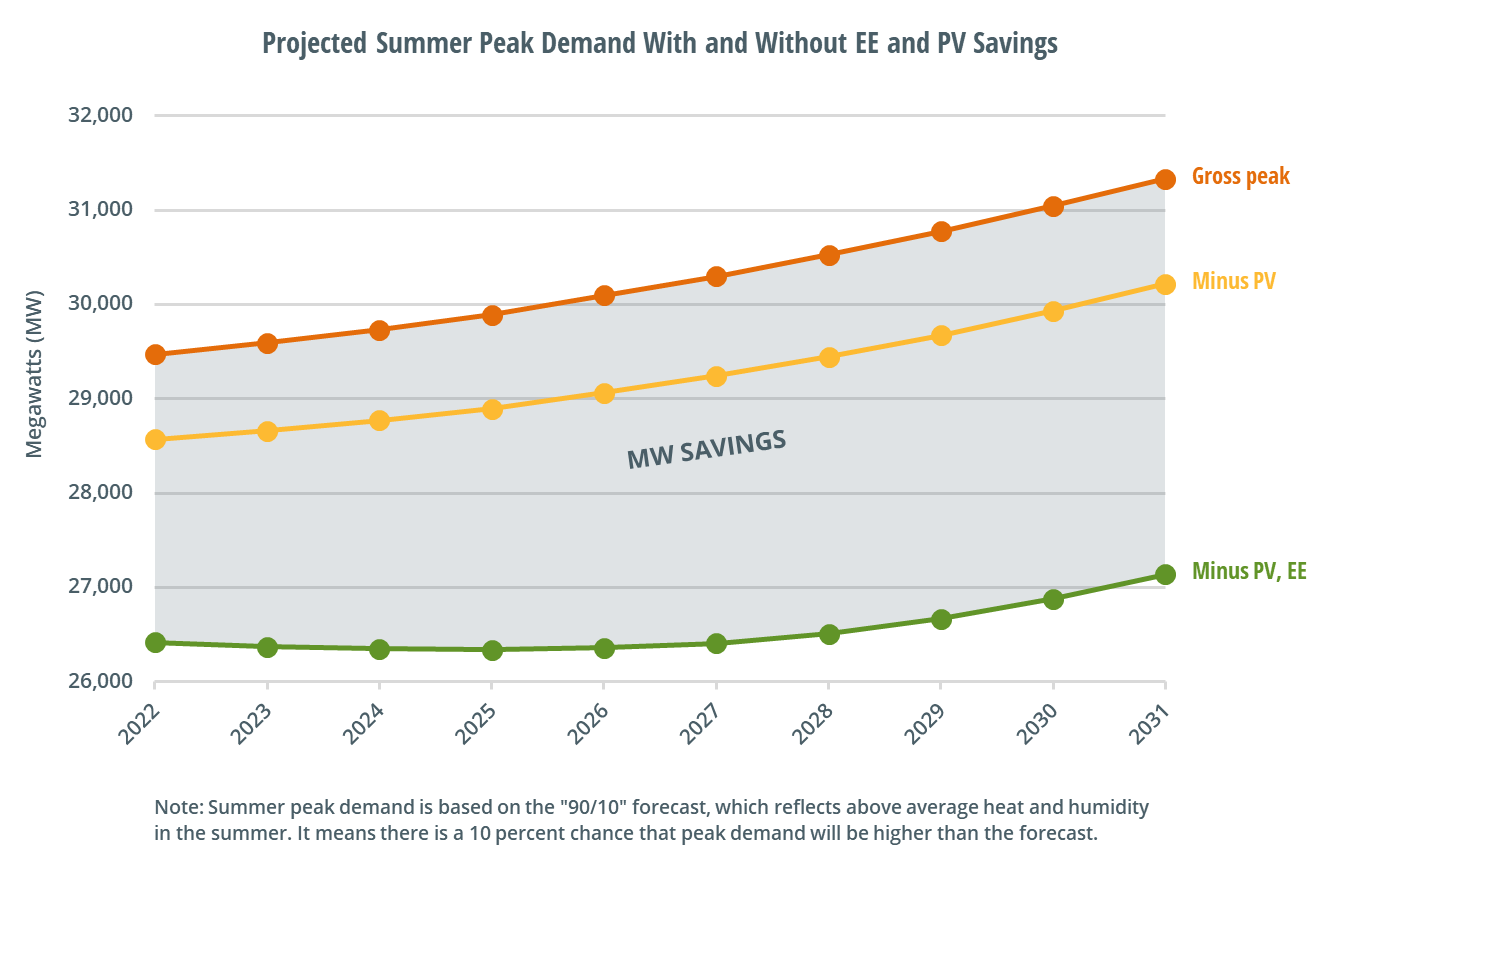 Projected Summer Peak Demand With and Without EE and Savings